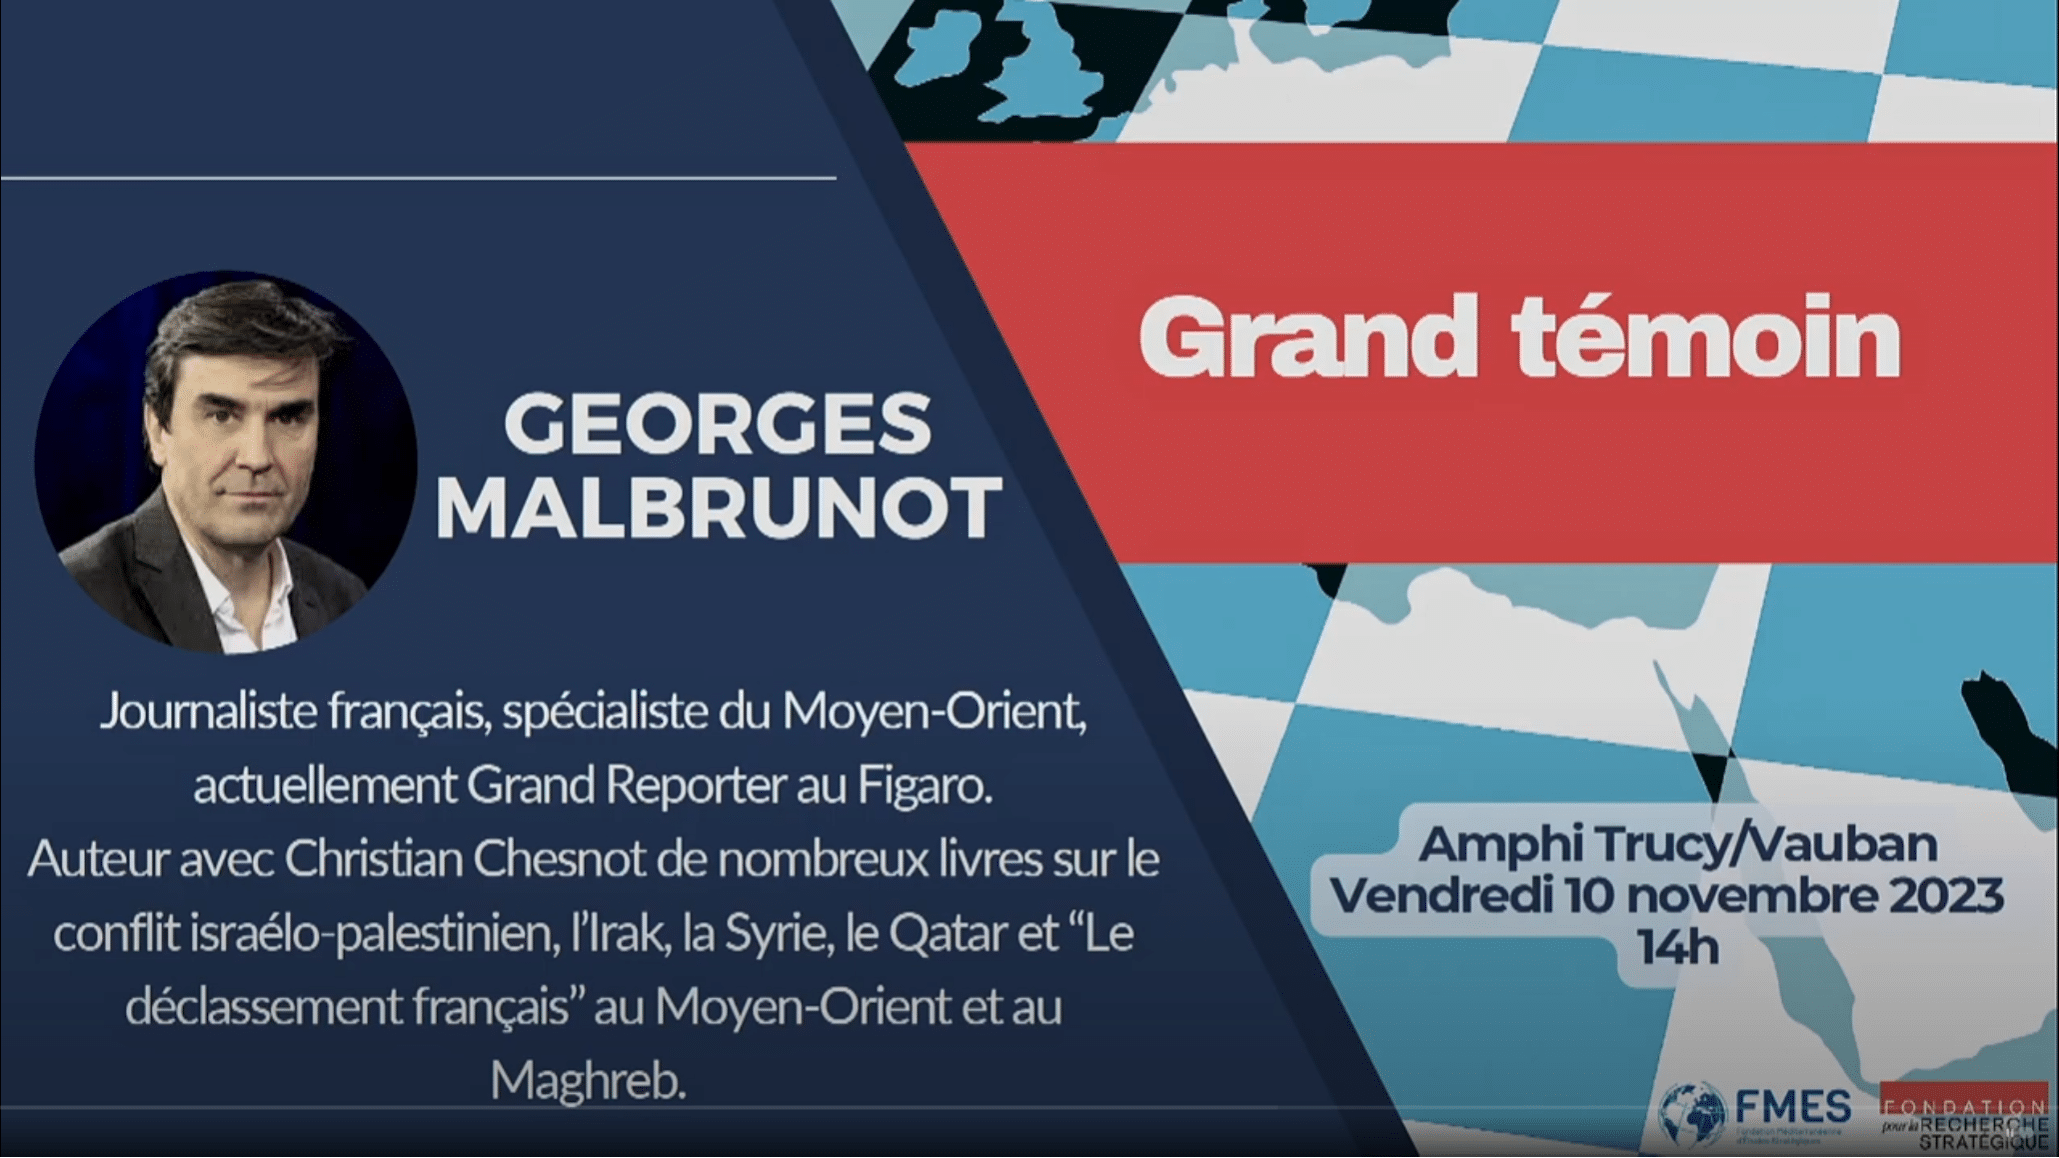 Grand Témoin RSMed 2023: Georges Malbrunot